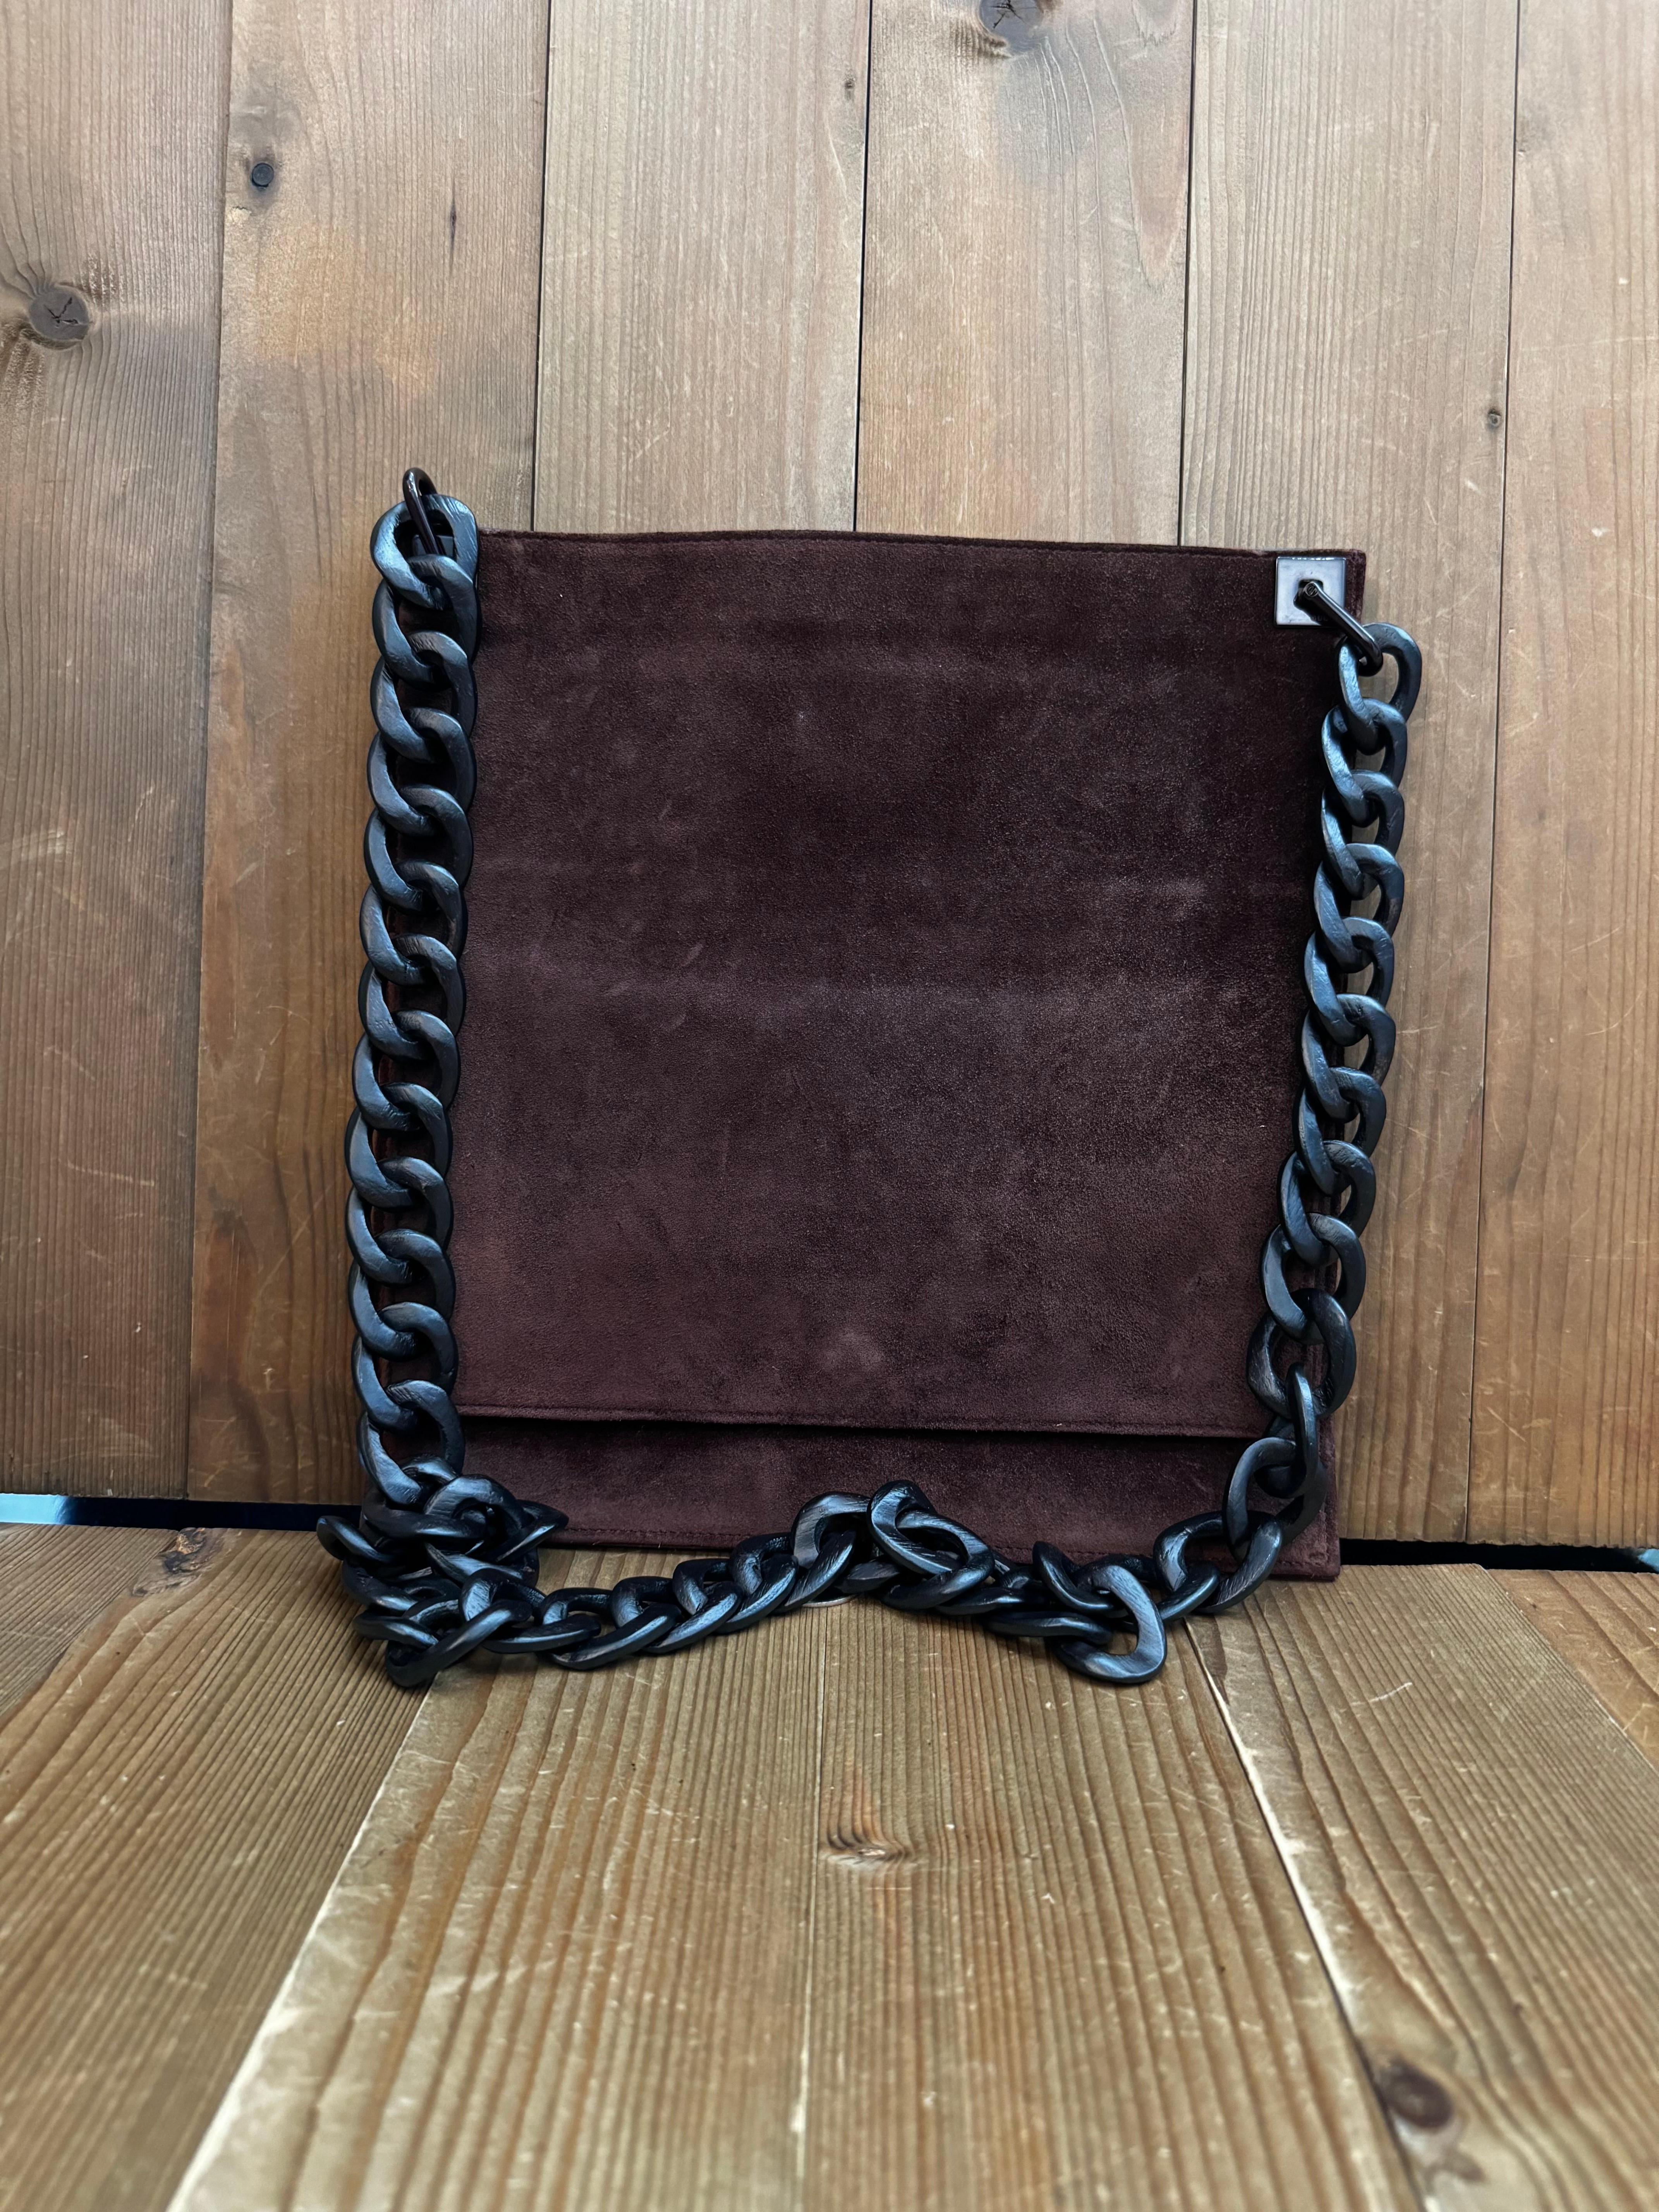 This vintage GUCCI flat messenger bag is crafted of nubuck leather in black featuring a wooden chain. Top opens to the main compartment lined with nubuck leather featuring a patch pocket. The front features a flap pocket with magnetic snap closure.